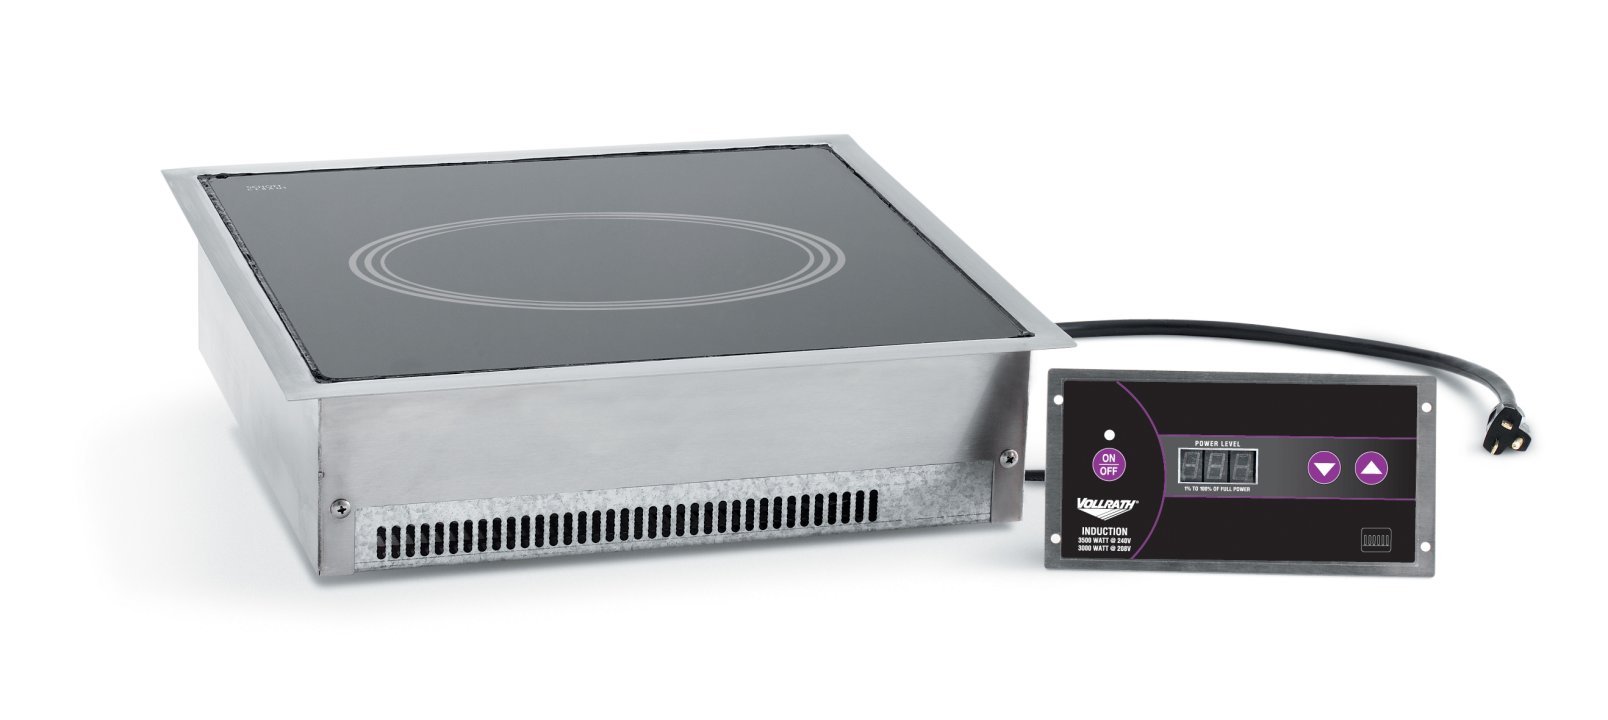 208- to 240-volt Ultra-Series single-hob drop-in induction range with UK plug